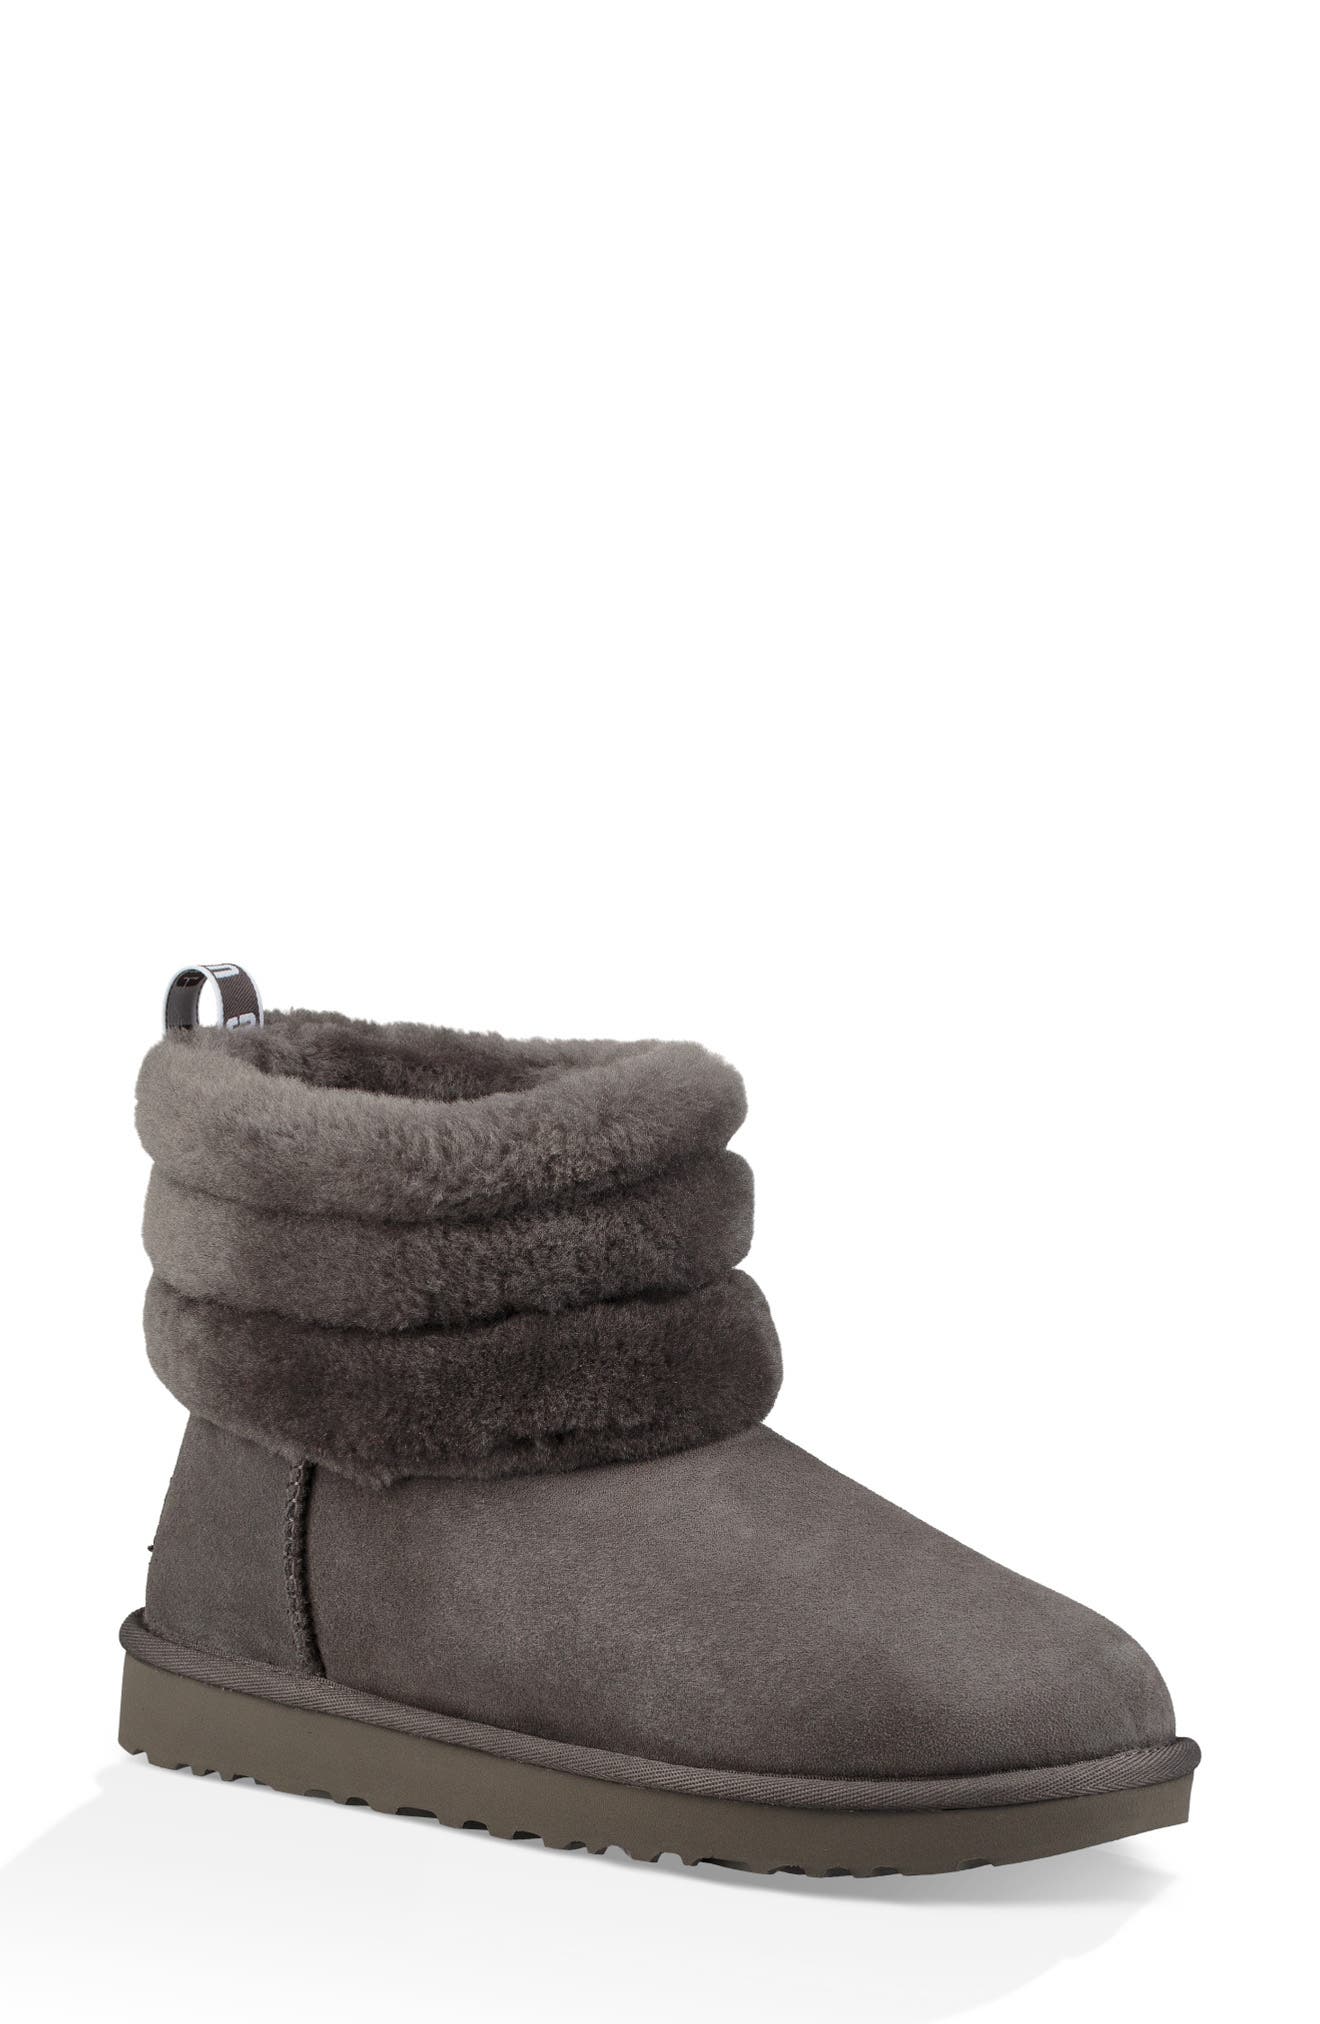 ugg boots sale womens